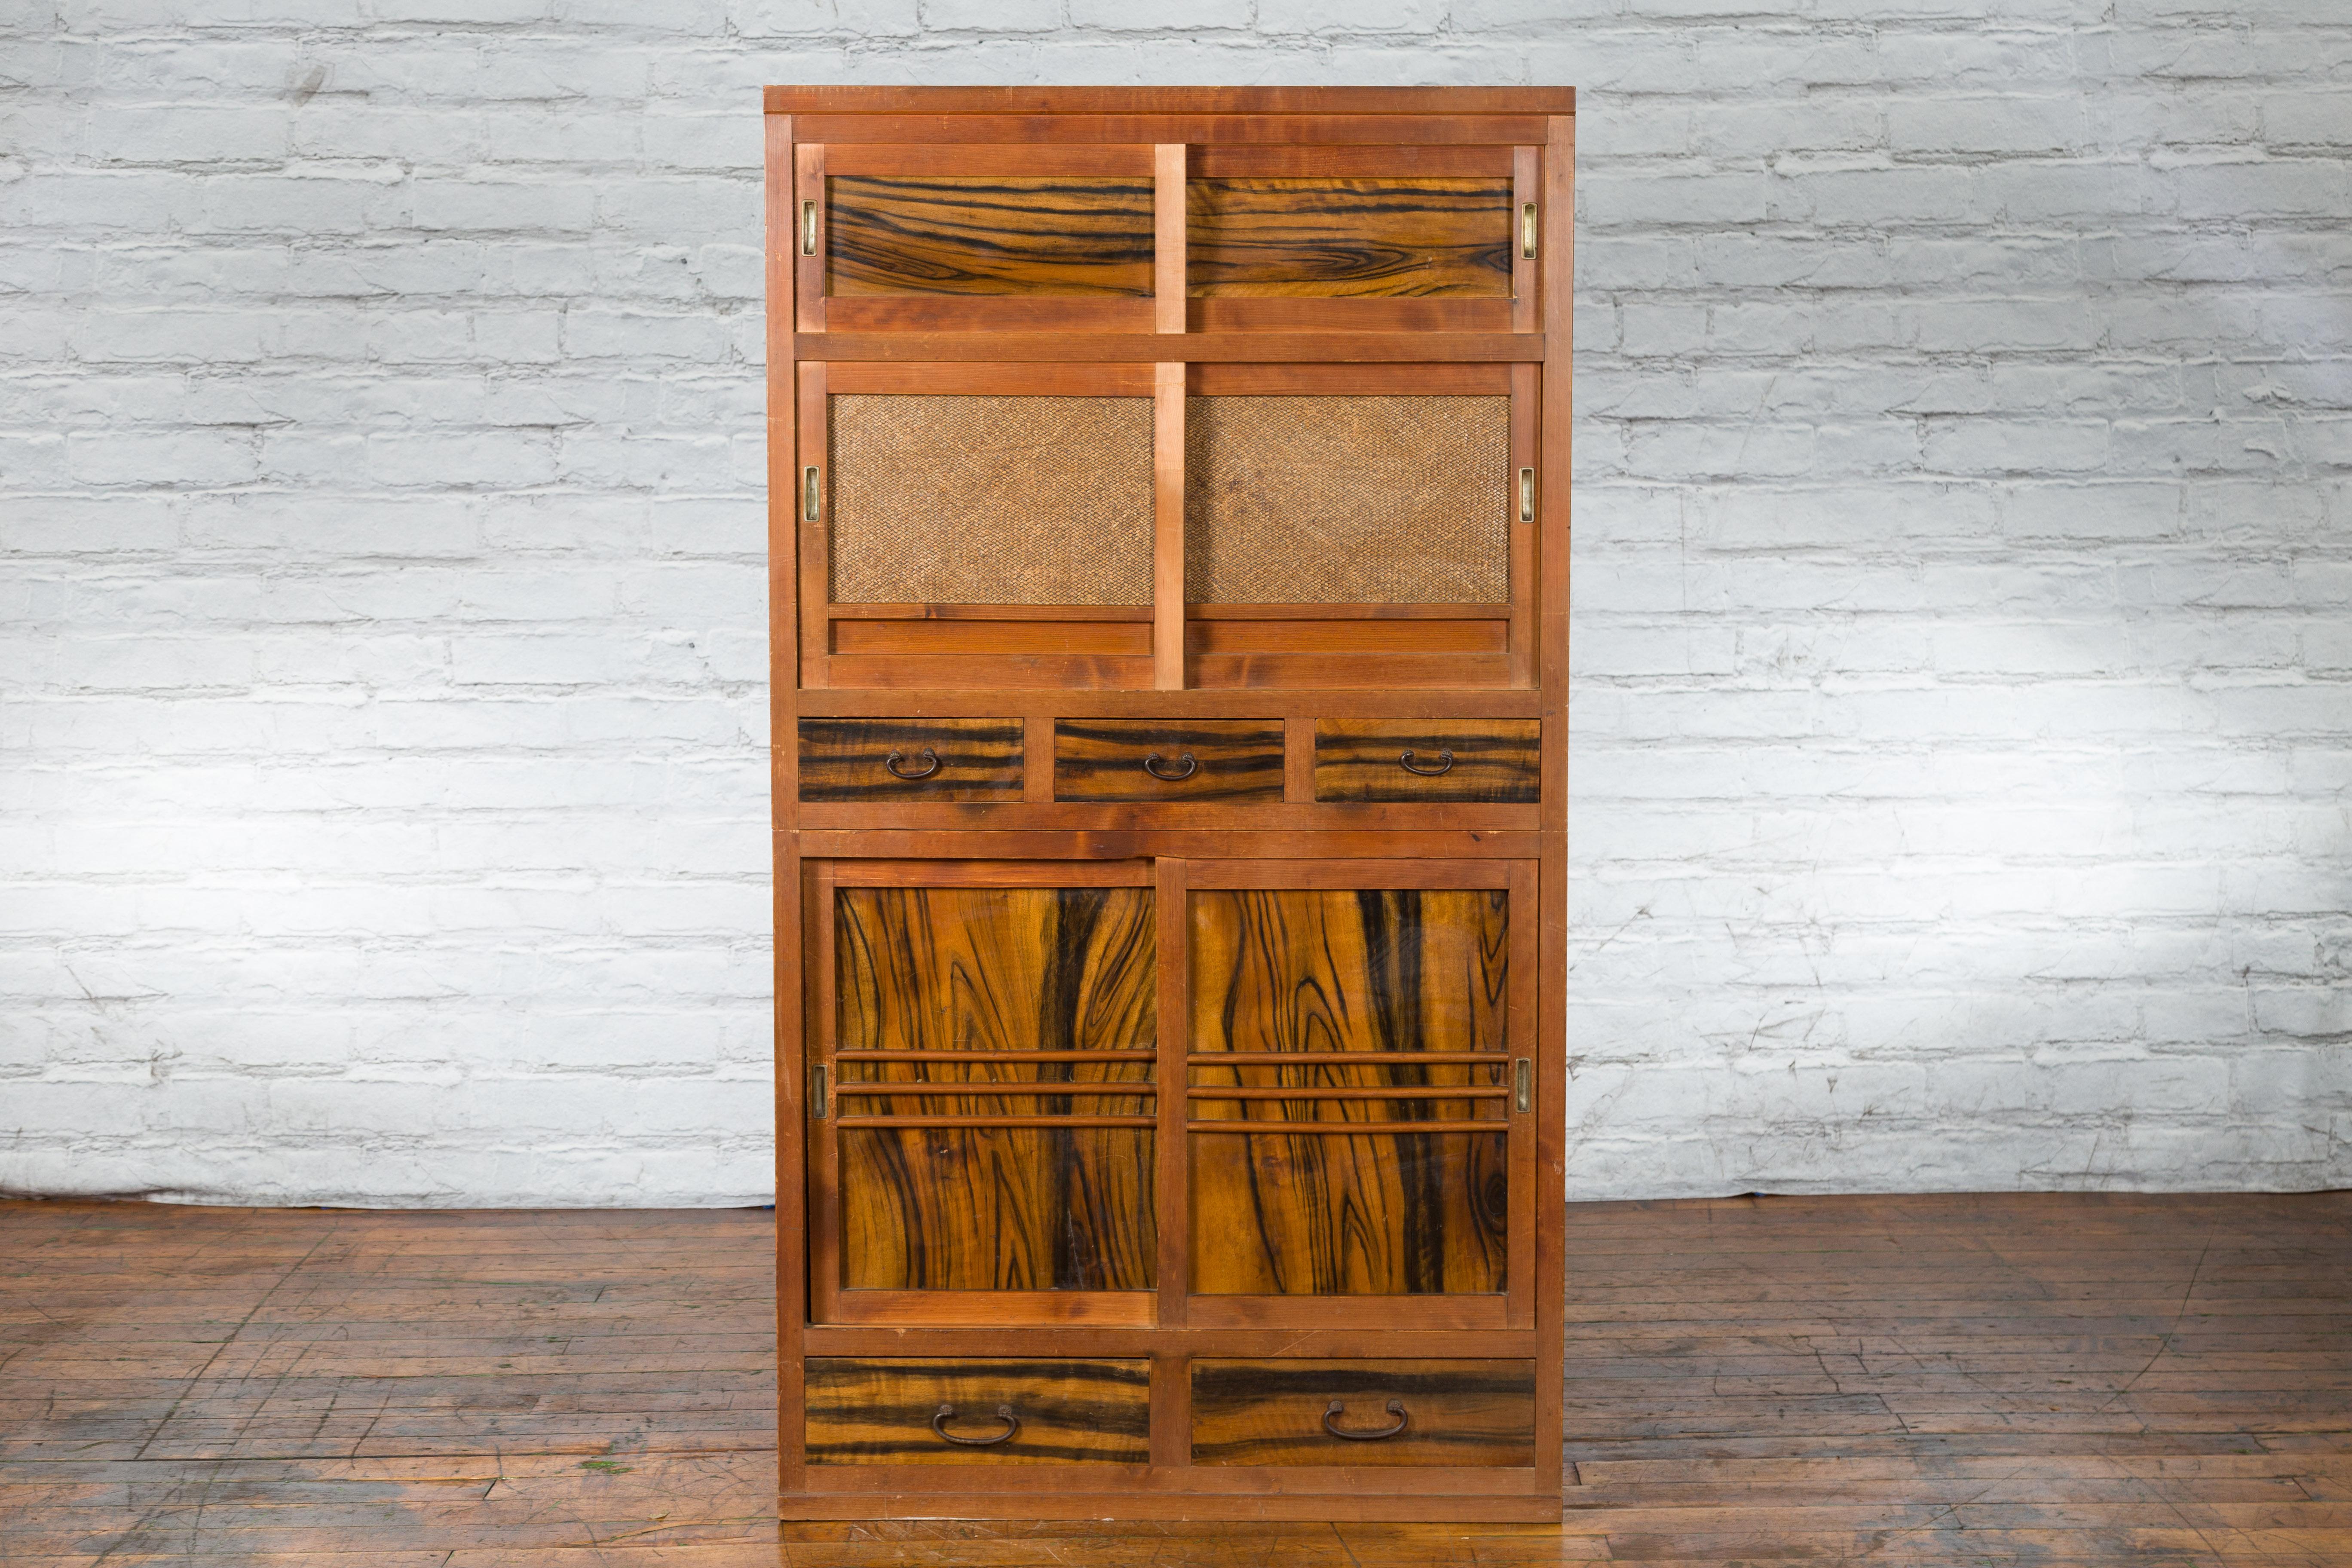 Wood Japanese Meiji Period Late 19th Century Cabinet with Sliding Doors and Drawers